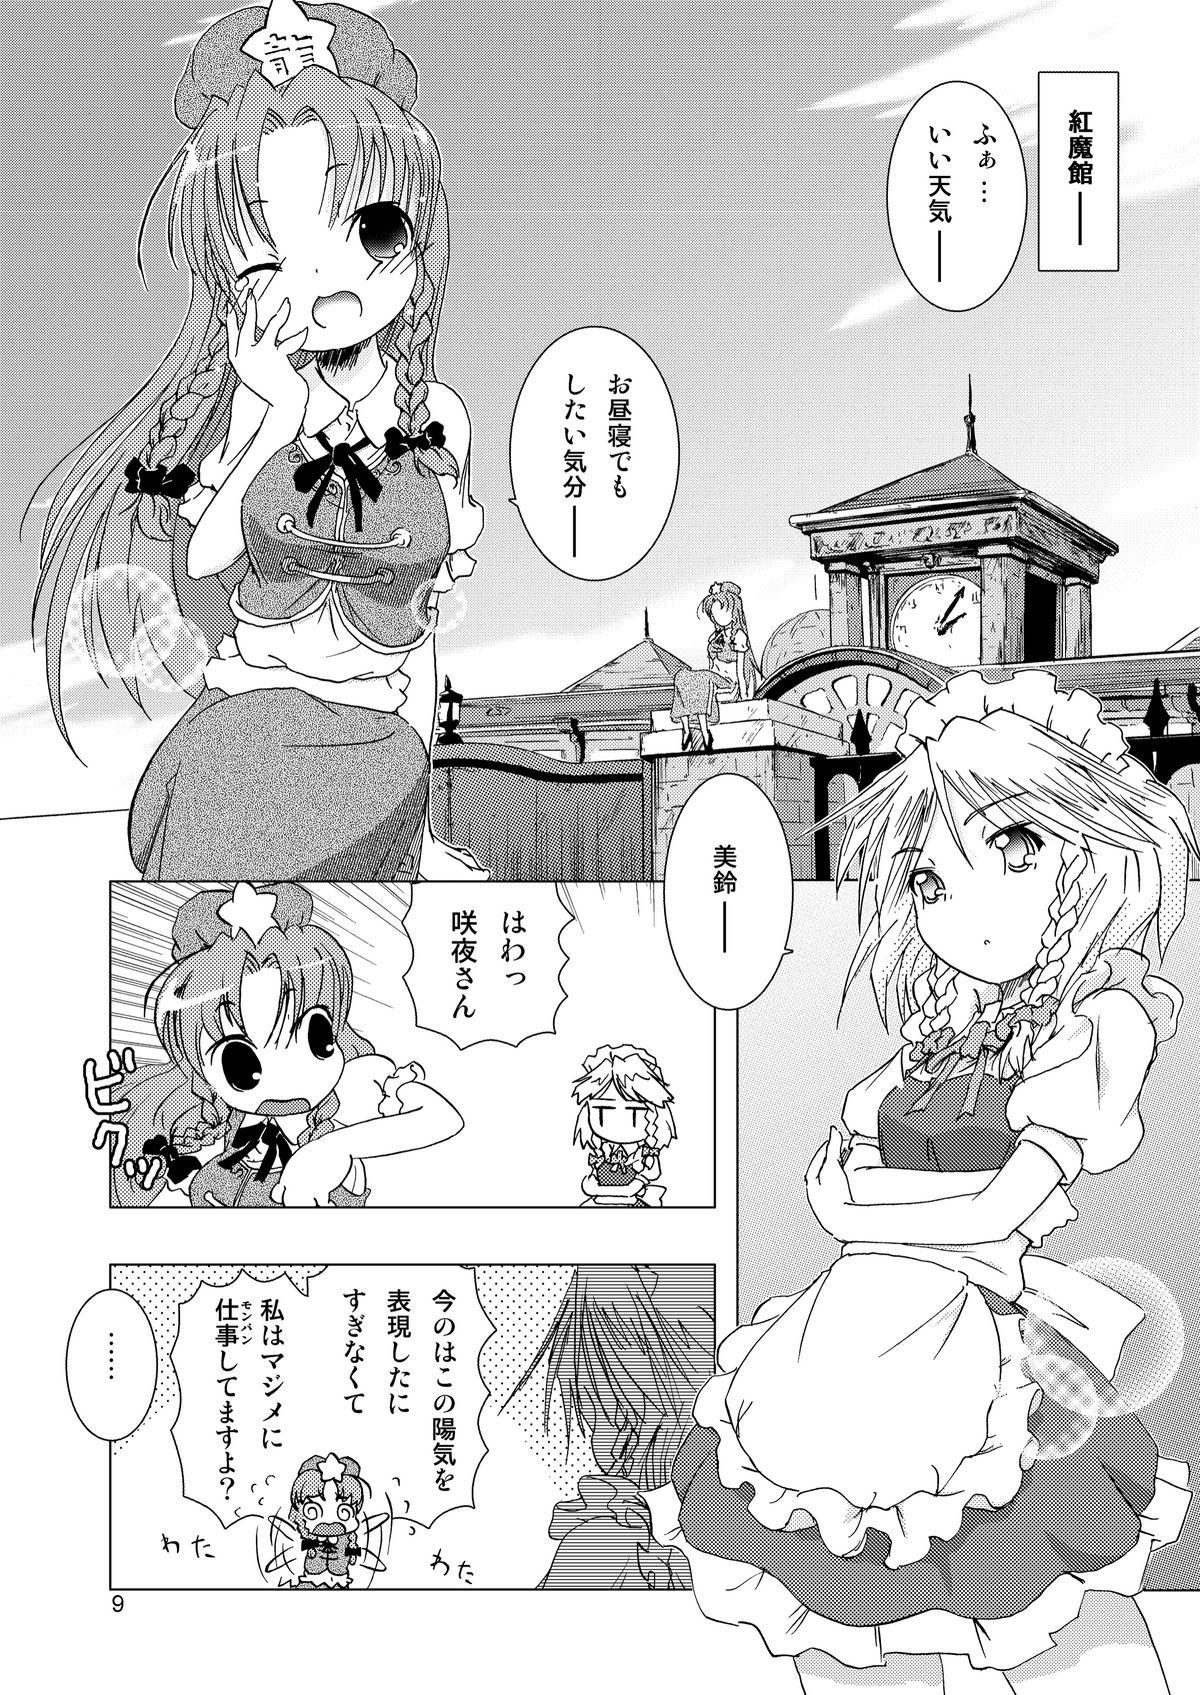 Submissive Eternal Memory - Touhou project Chaturbate - Page 9